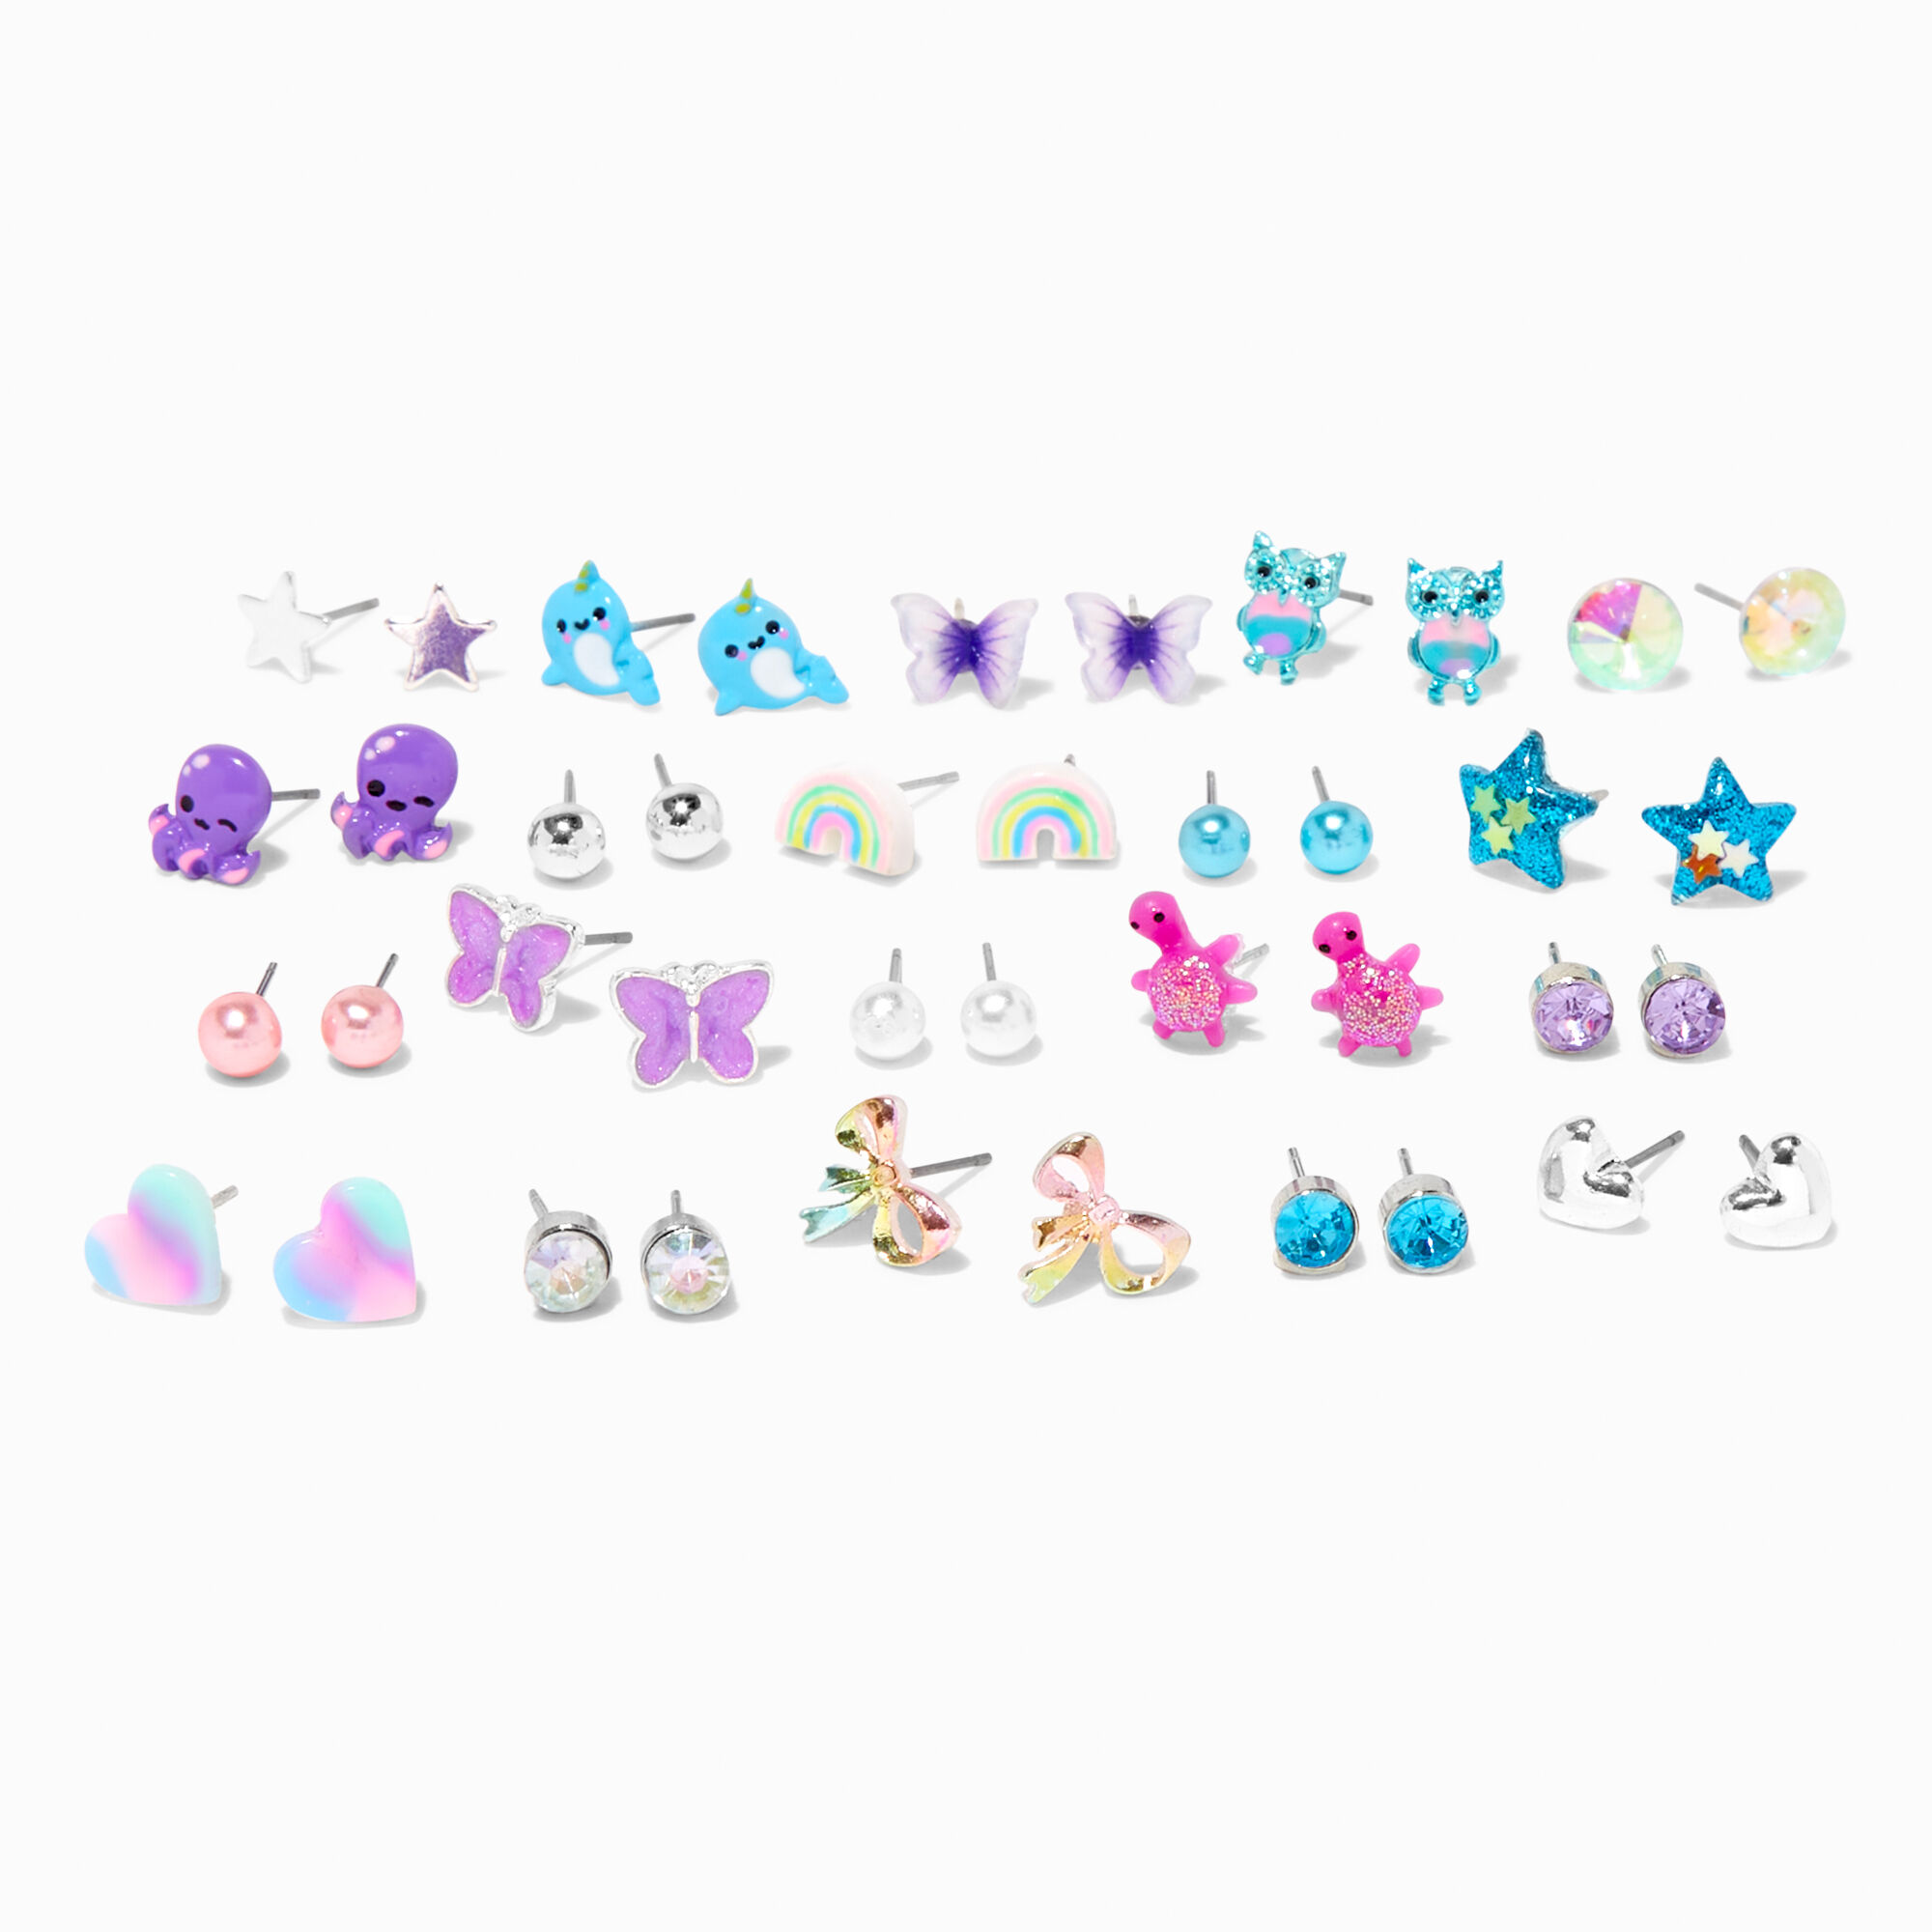 Discover more than 254 earrings for girls kids